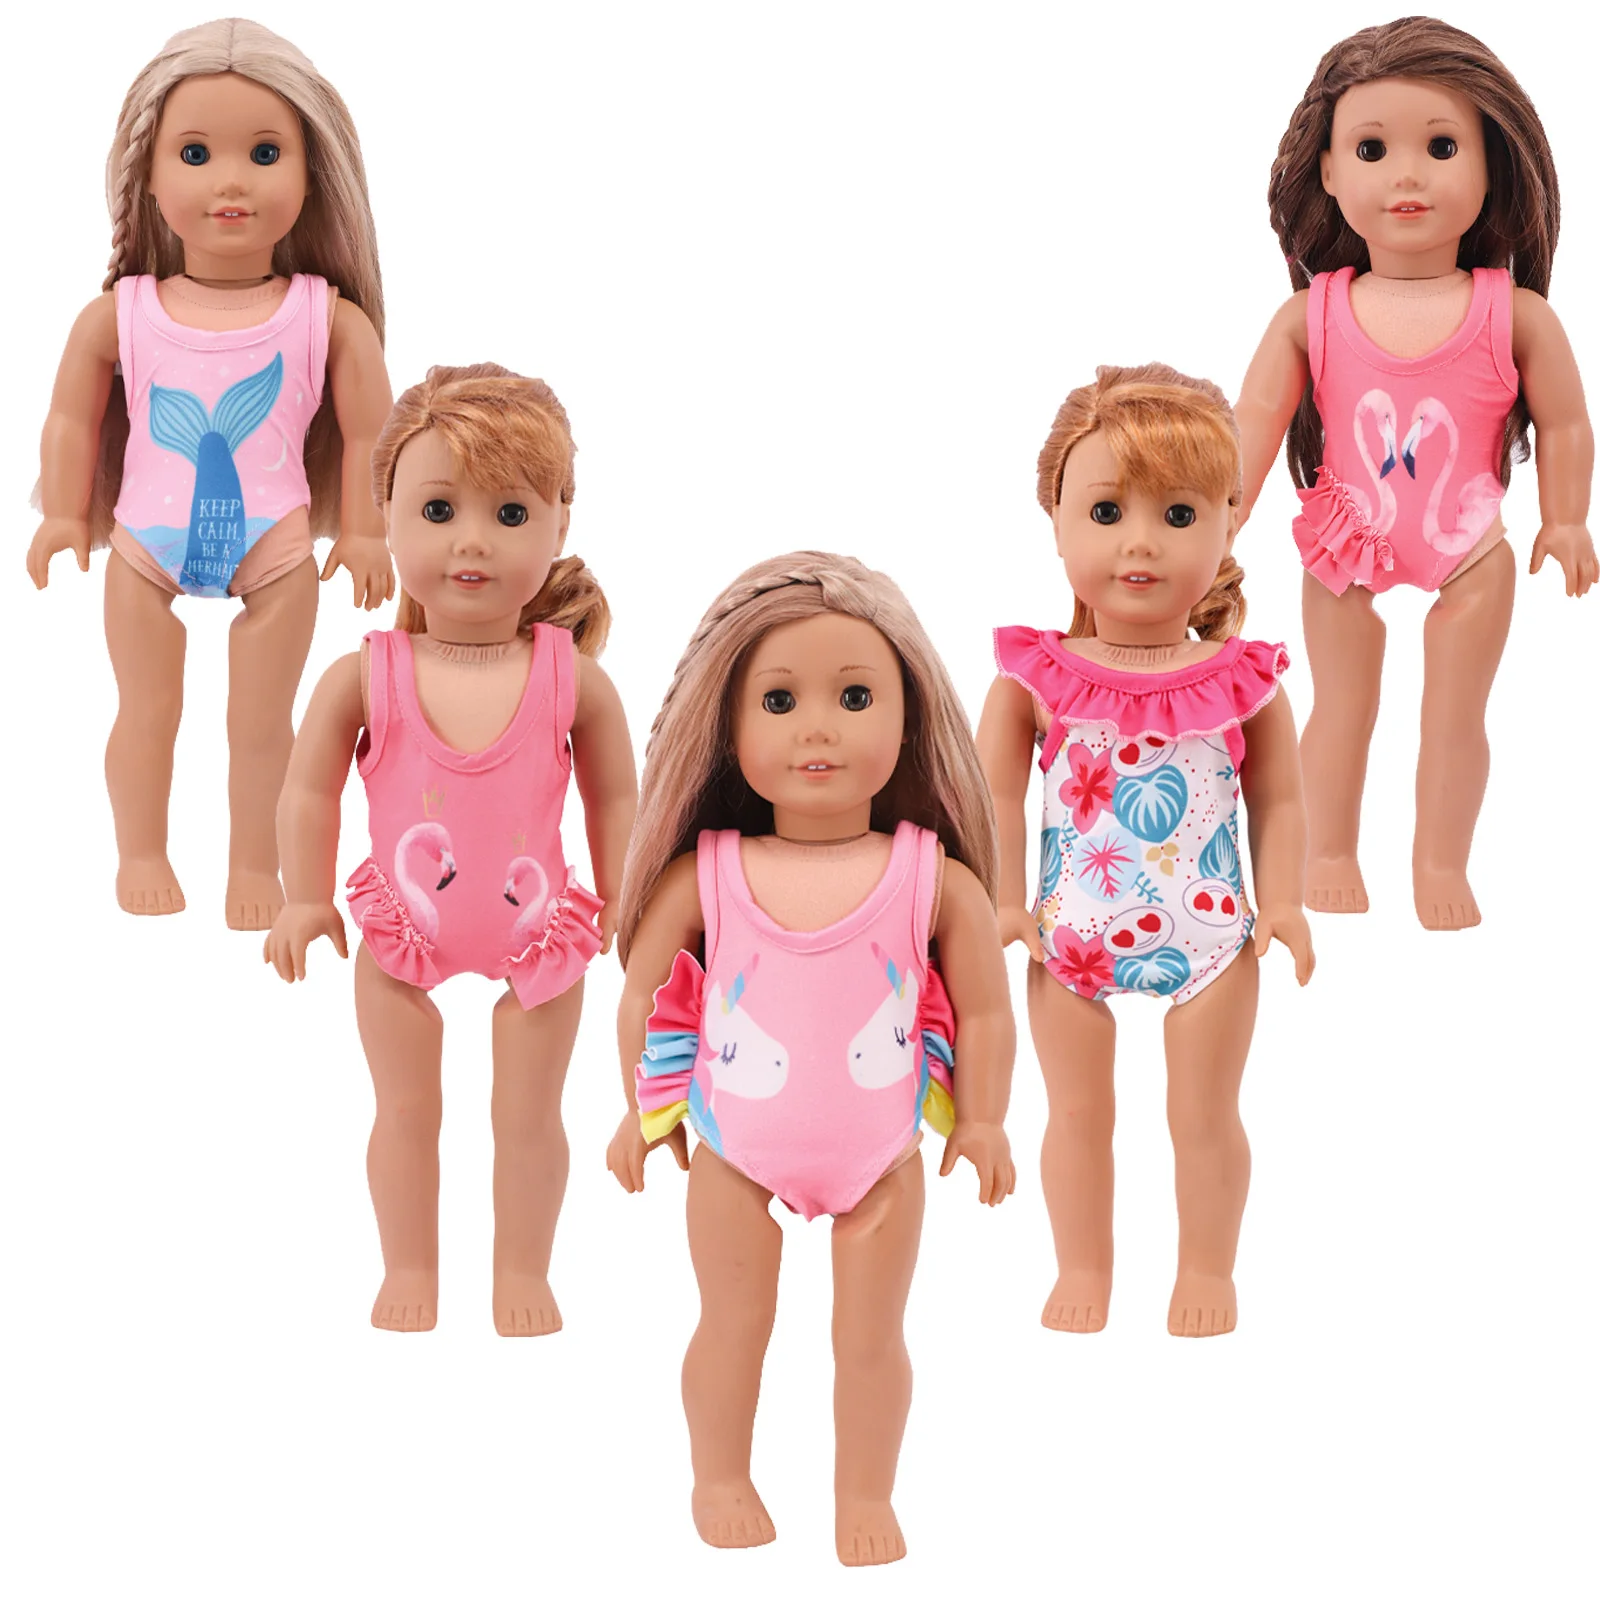 Summer Clothes One-piece Flamingo Swimsuit  For Girl Of 18Inch American,43Cm Reborn Doll Accessories,Our Generation Doll Clothes